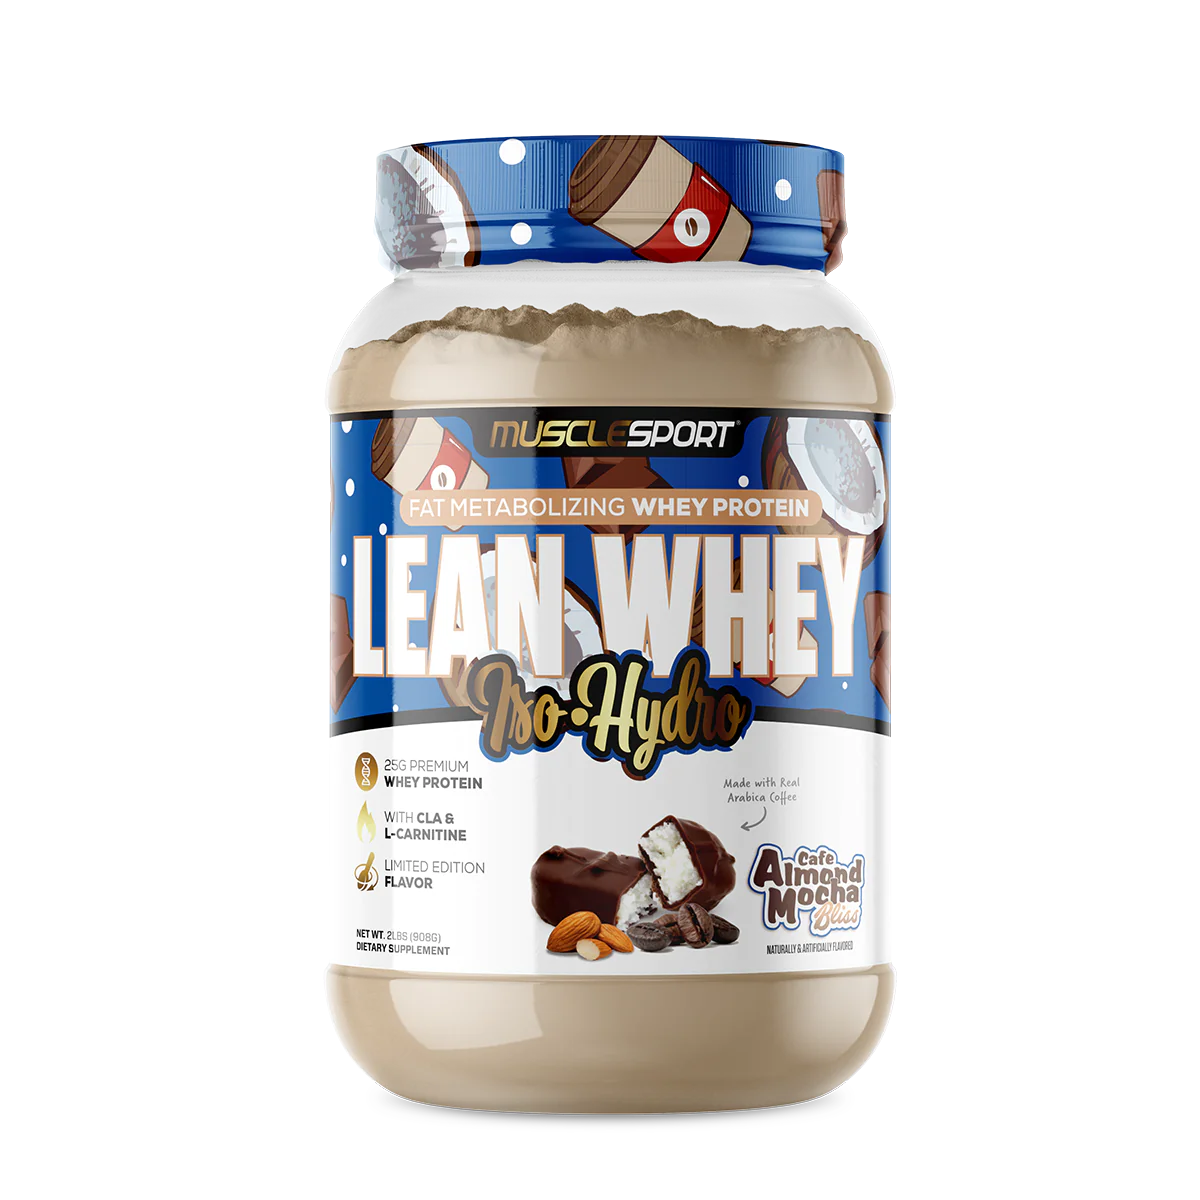 Lean Whey™ Protein 2lb - Musclesport - Prime Sports Nutrition